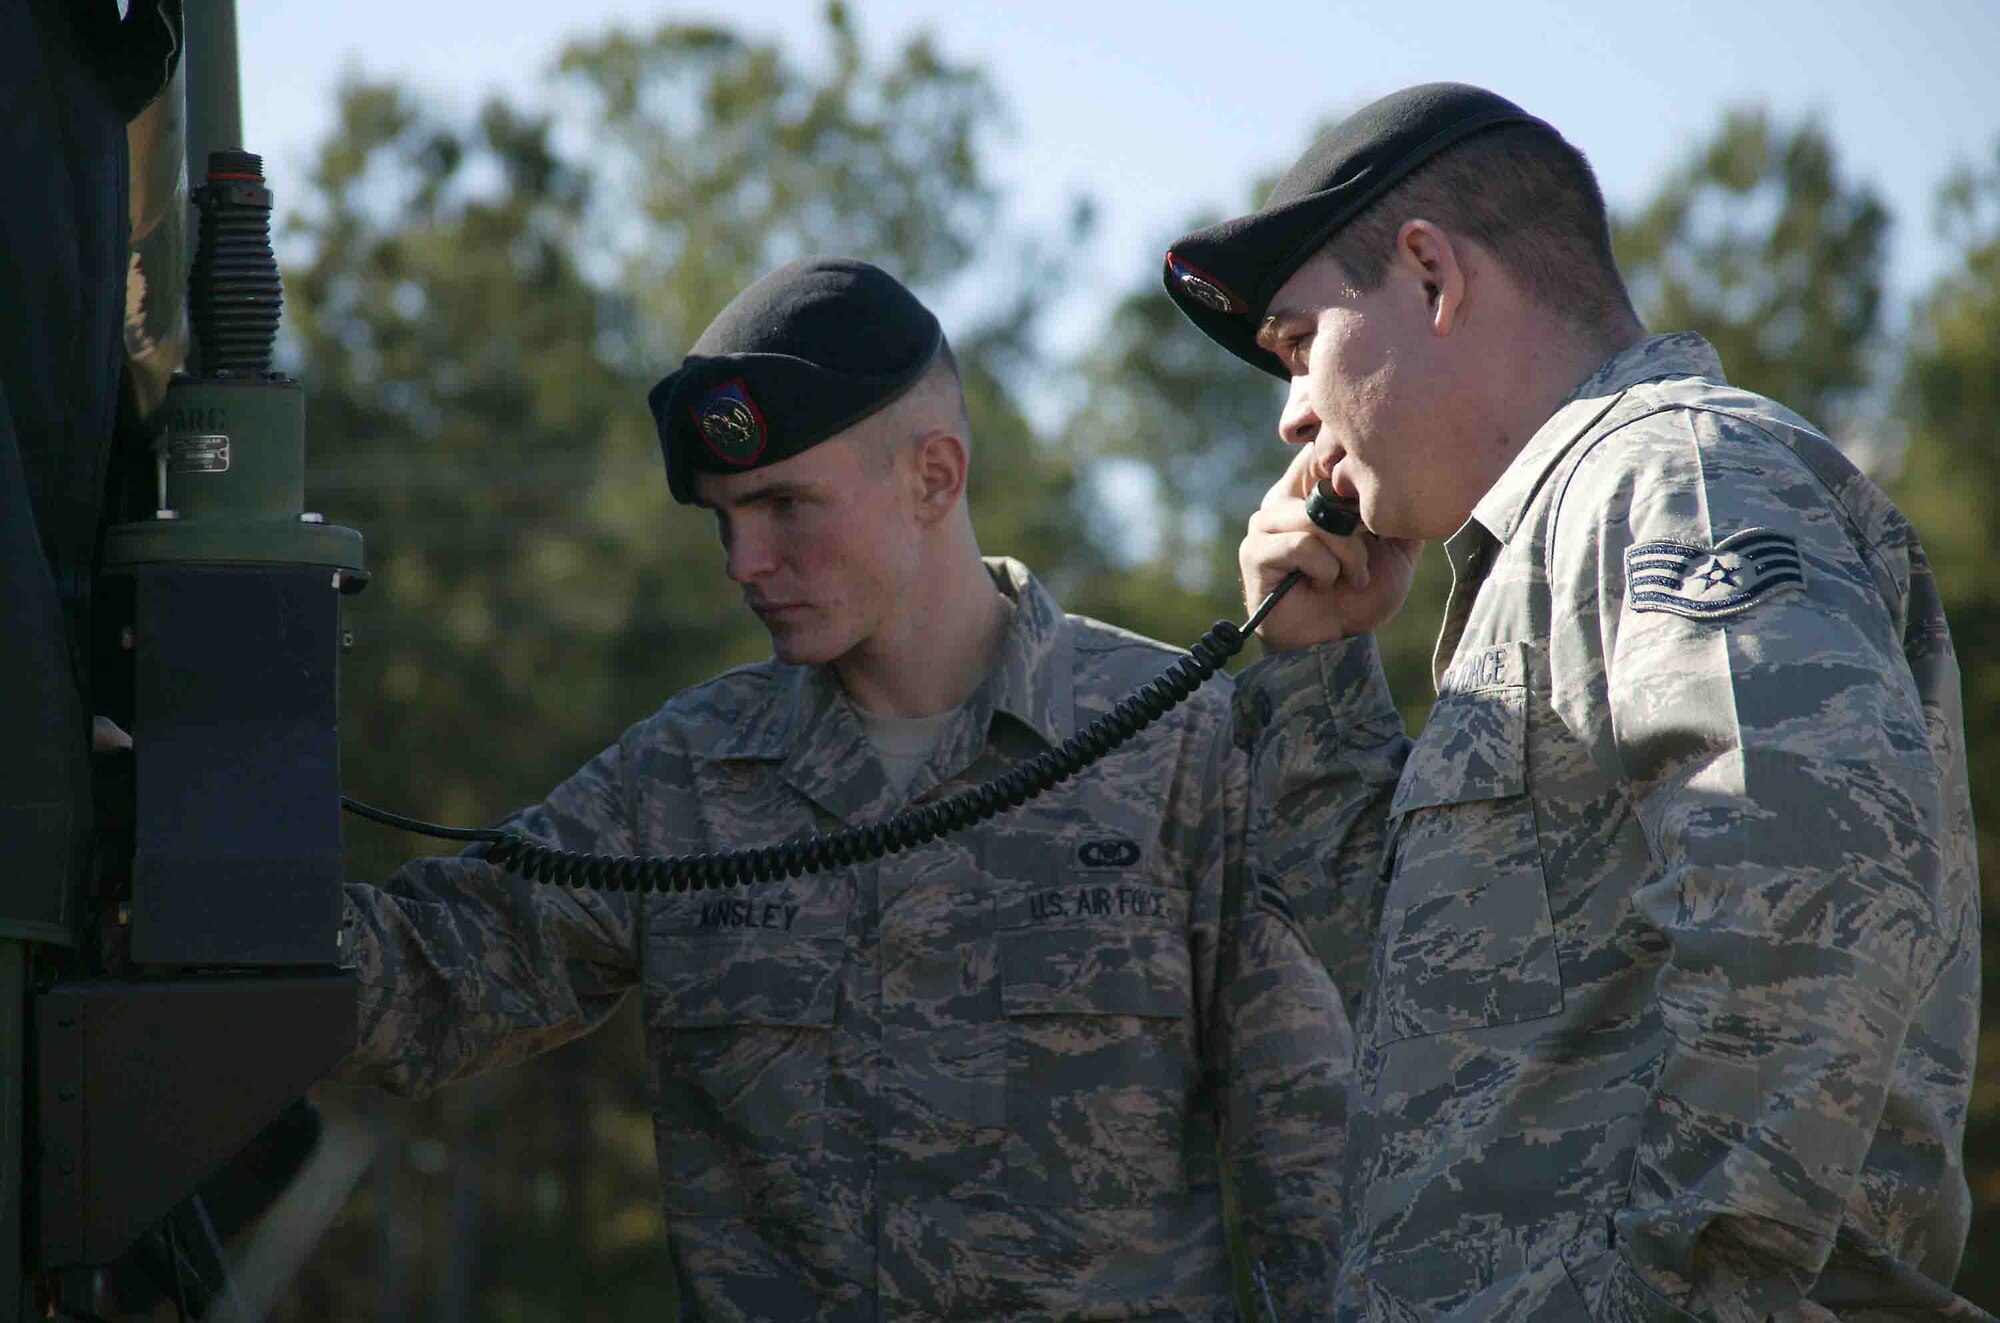 SHAW AIR FORCE BASE, S.C. -- Staff Sgt. Ryan Fausey, 682nd Air Support Operations Squadron tactical air control party controller, performs a radio check over satellite communications on the Joint Air Request Net while Airman 1st Class John Kinsley, 682nd ASOS TACP controller, makes an adjustment Dec. 4. Sergeant Fausey is Air Combat Command's Annual Winner of the Fighter Duty Technician Award for 2007. The FDT award recognizes outstanding individual performance by TACP specialists in execution of joint terminal attack controller, TACP apprentice, and fighter duty technician duties. (U.S. Air Force photo/Staff Sgt. John Gordinier)